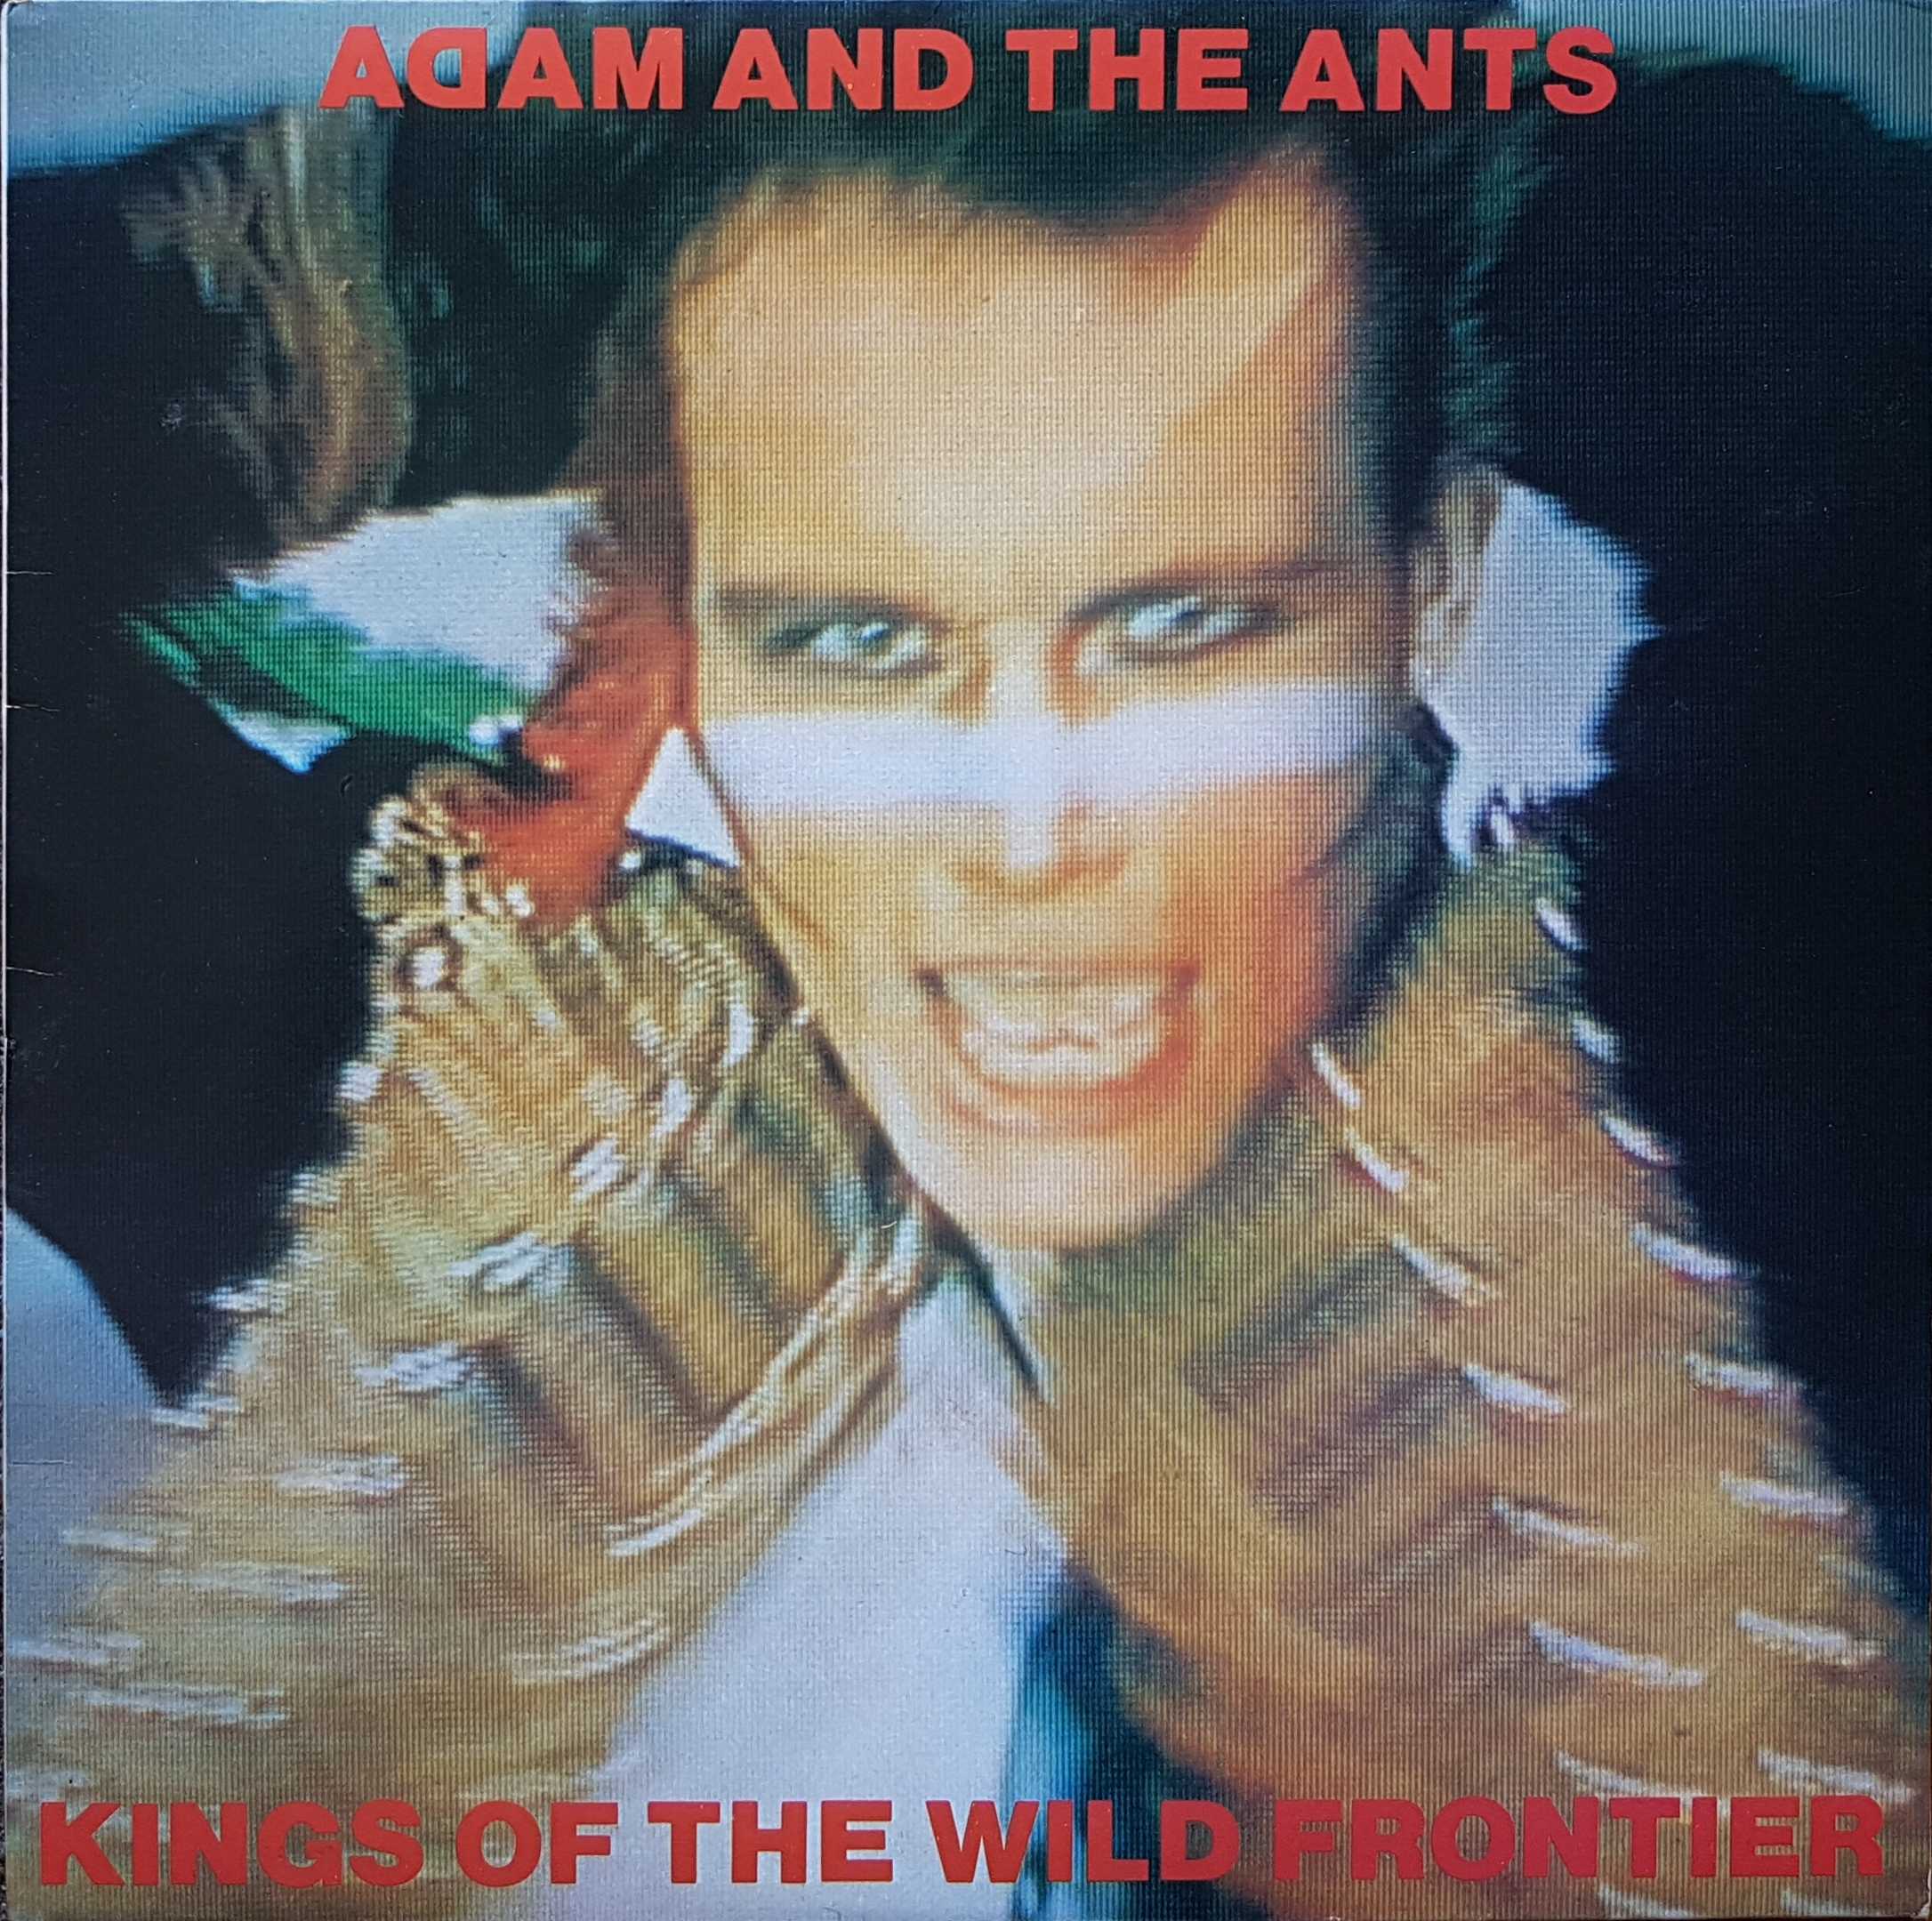 Picture of Kings of the wild frontier by artist Adam and the Ants 